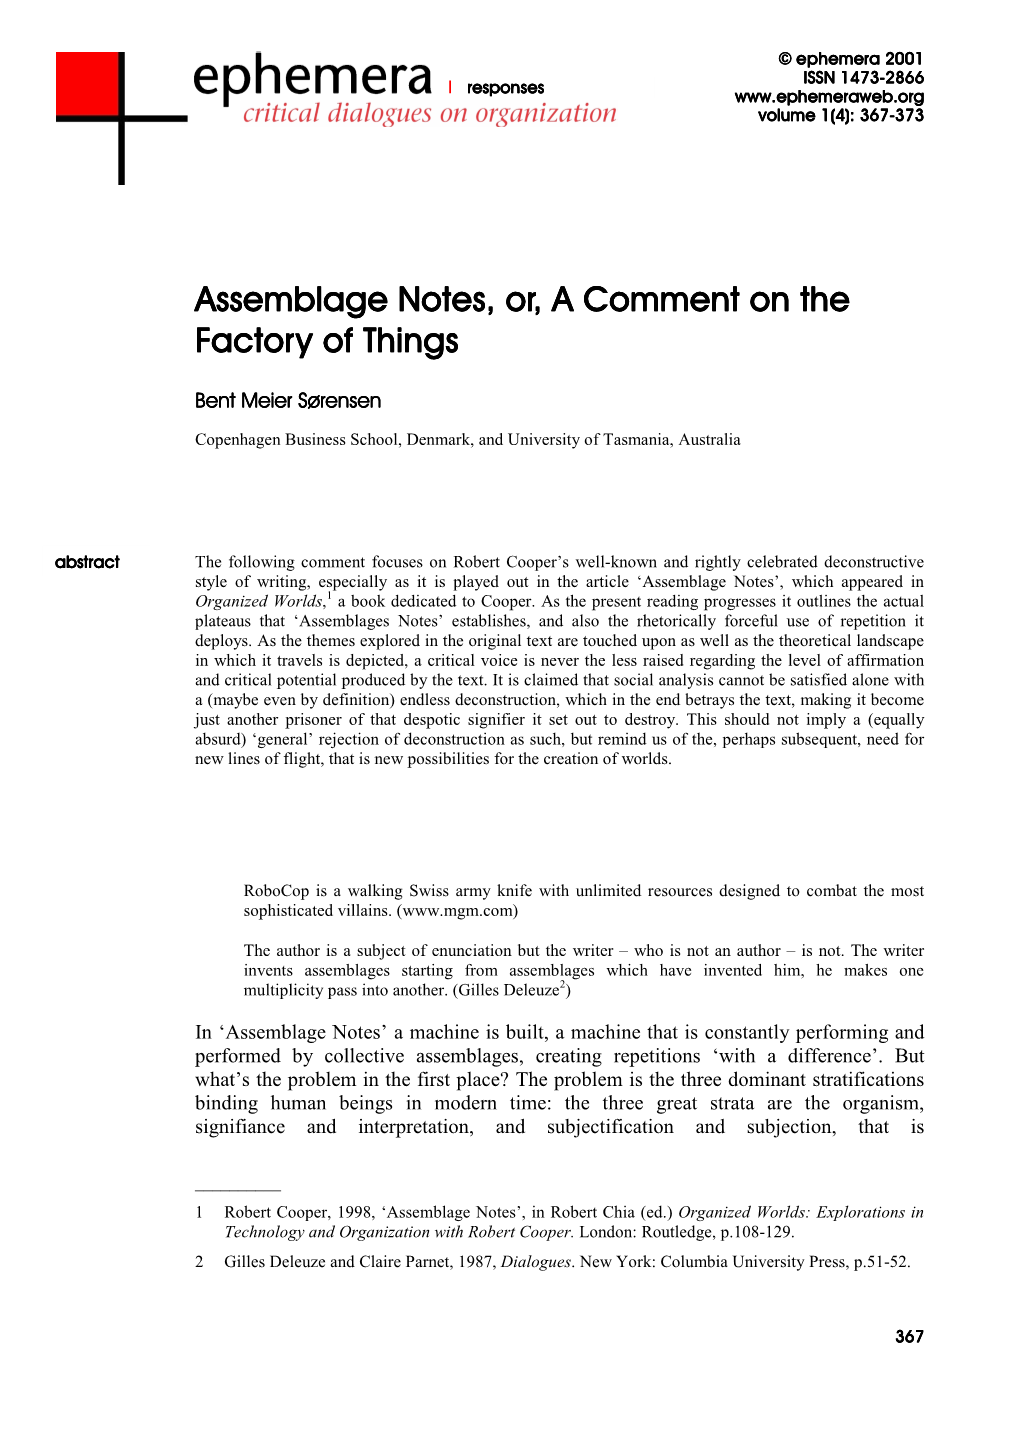 Assemblage Notes, Or, a Comment on Assemblage